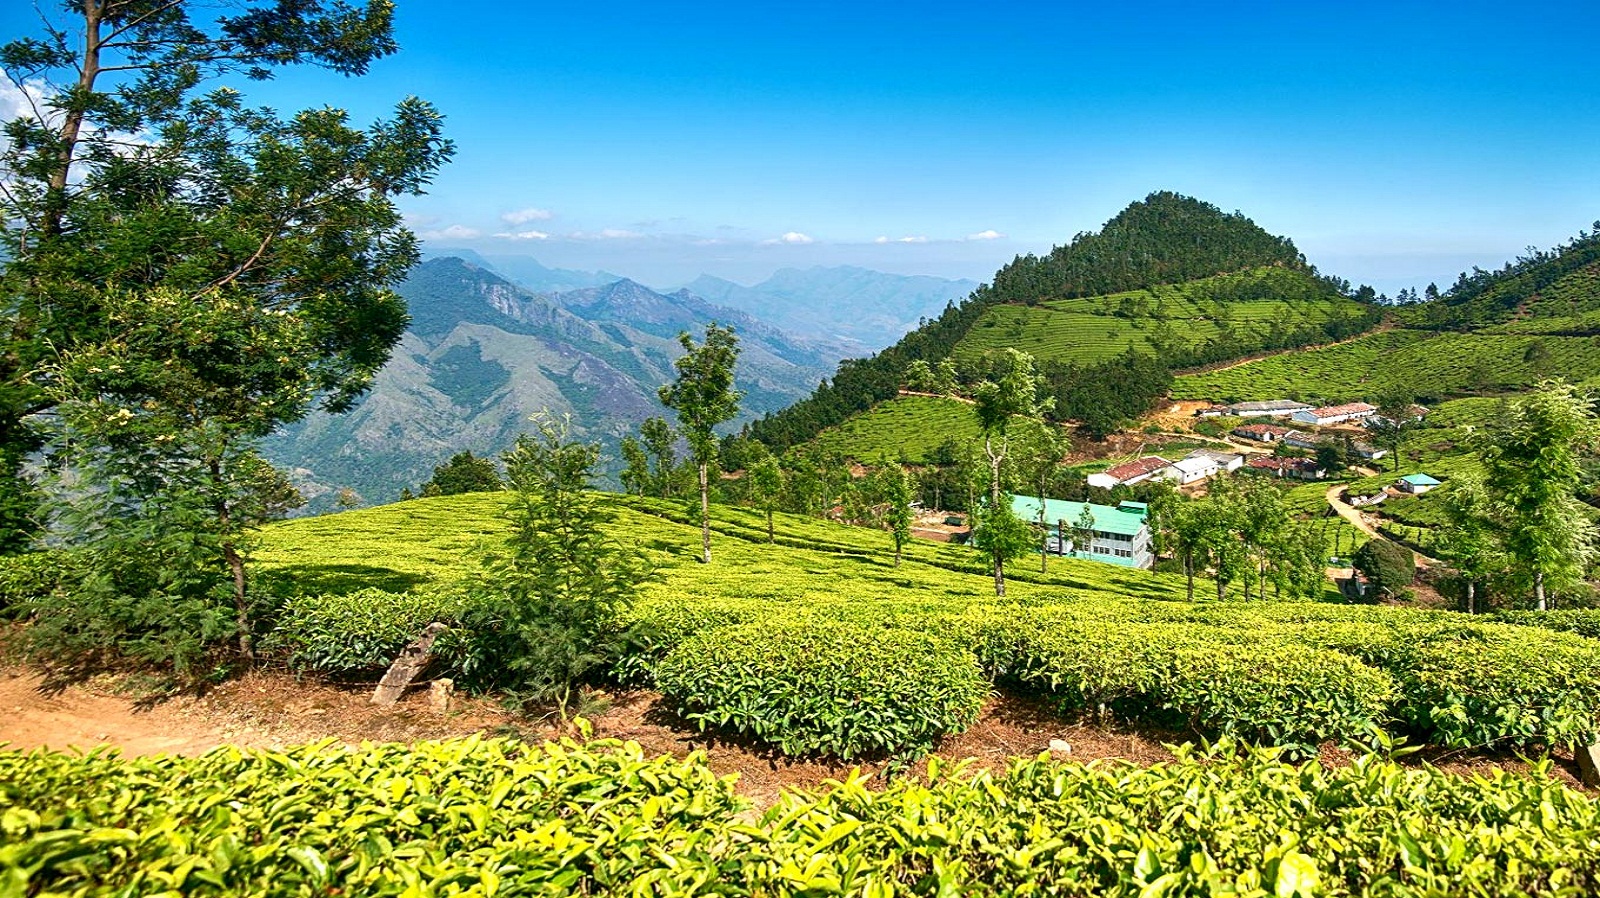 Places in North-east India That All Holiday Packages Should Include